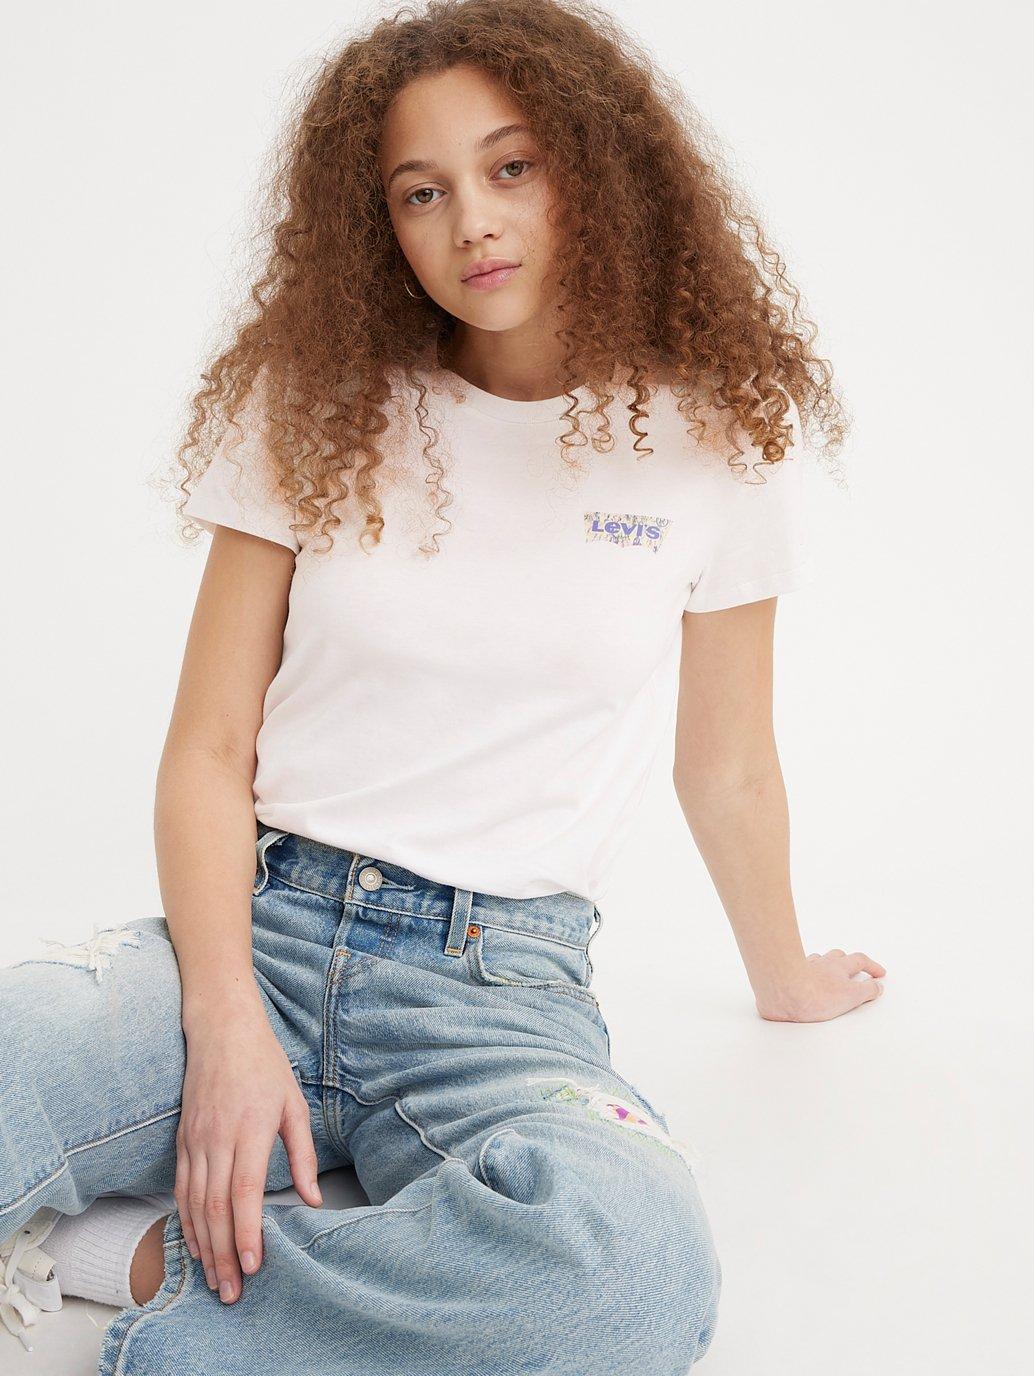 Buy Levi's Women's Perfect Tee | Levi’s Official Online Store SG